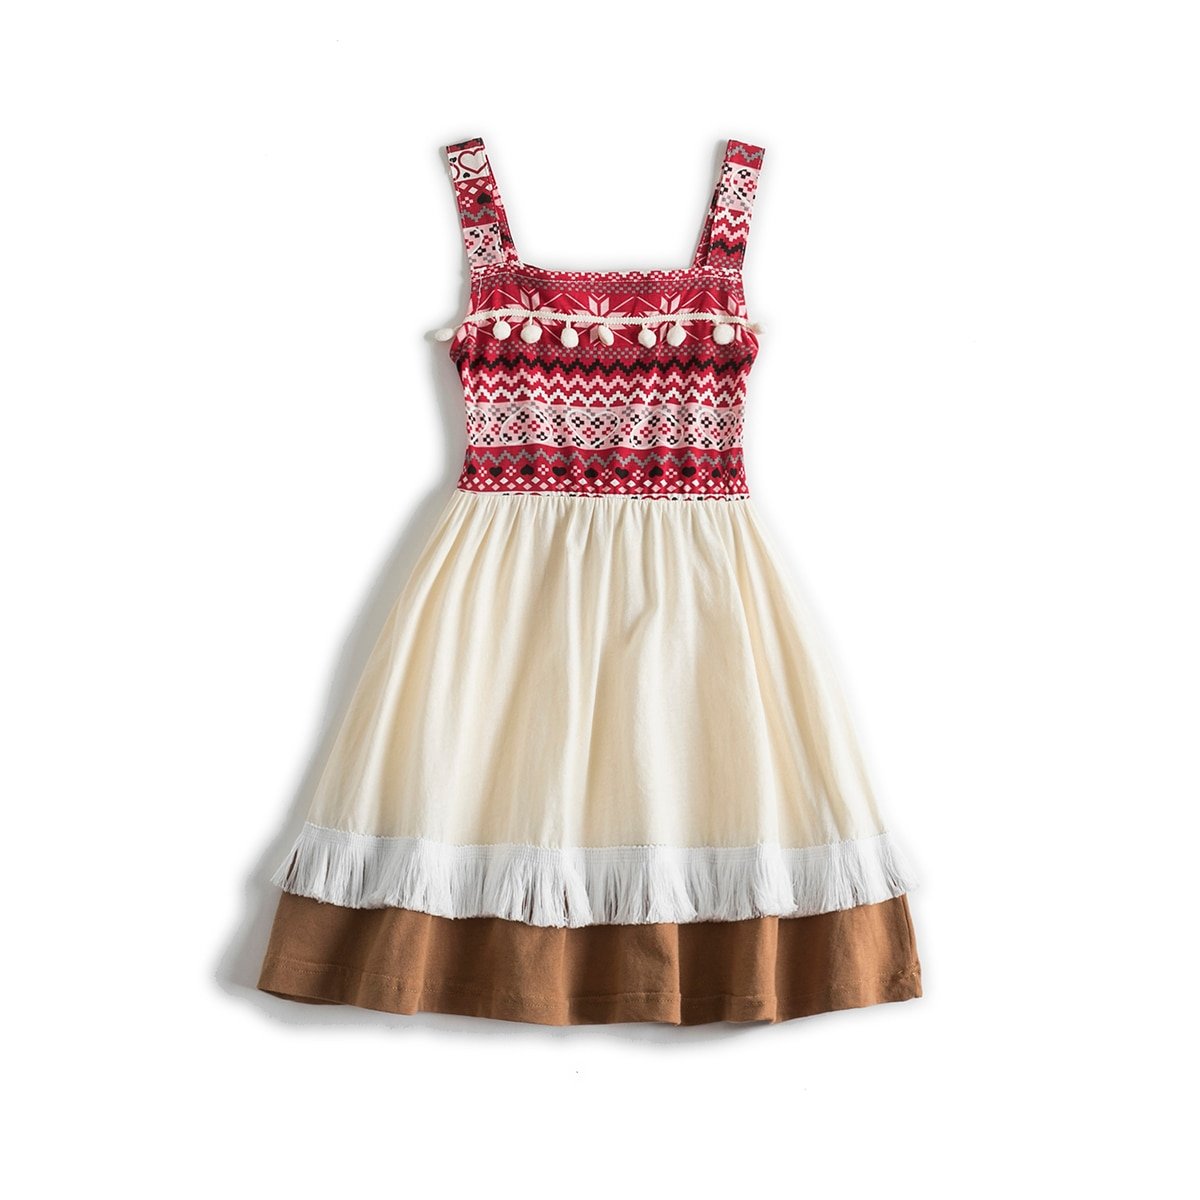 Best Princess Dress for Toddlers